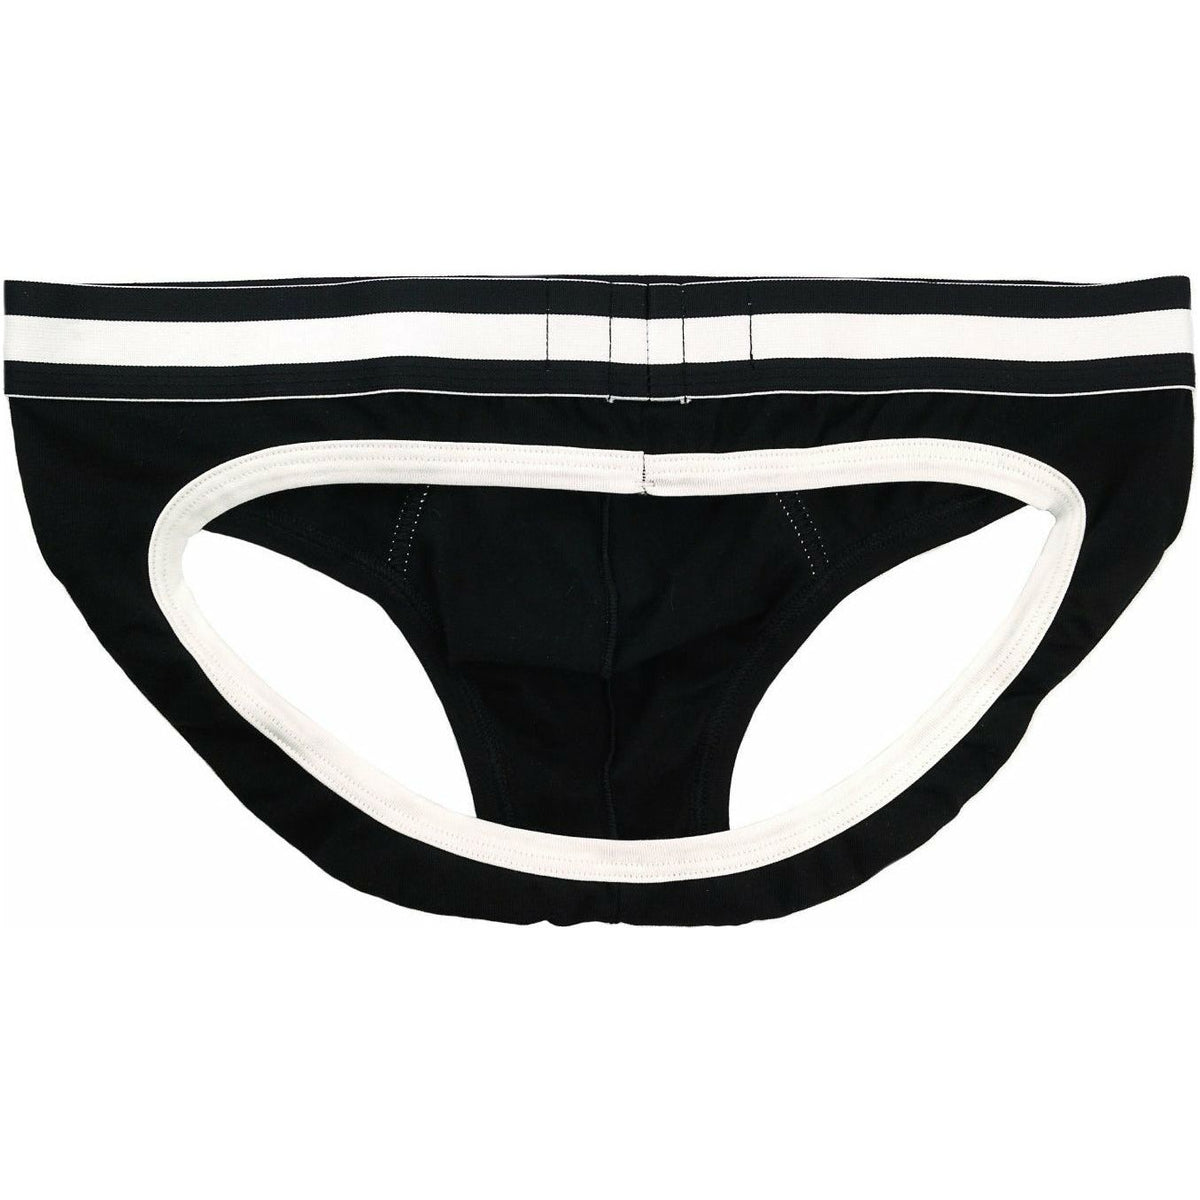 Prowler Classic Backless Brief – Black/White - Extra Large